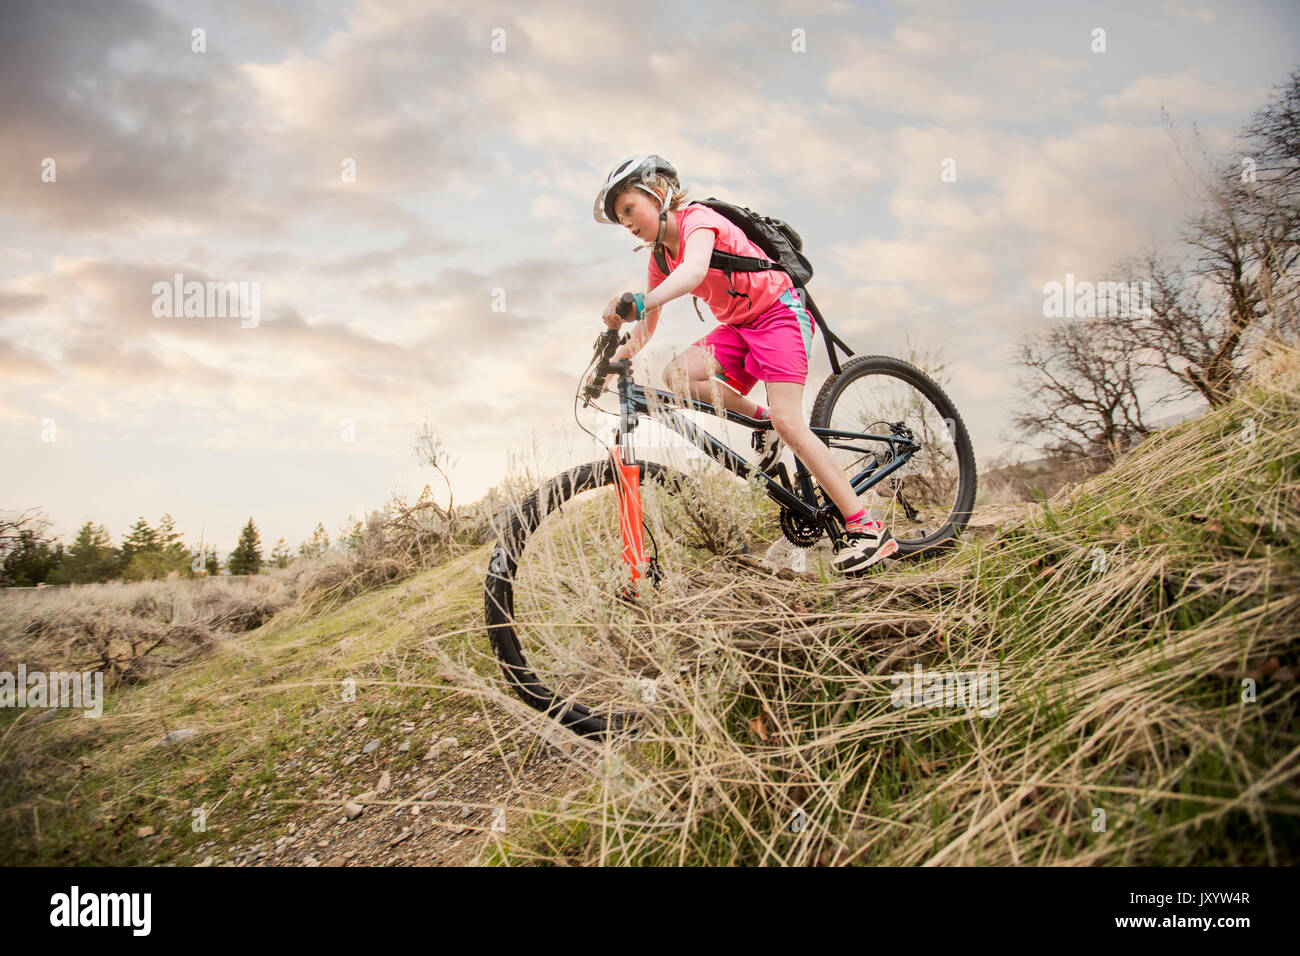 Caucasian girl riding bicycle on hill Stock Photo